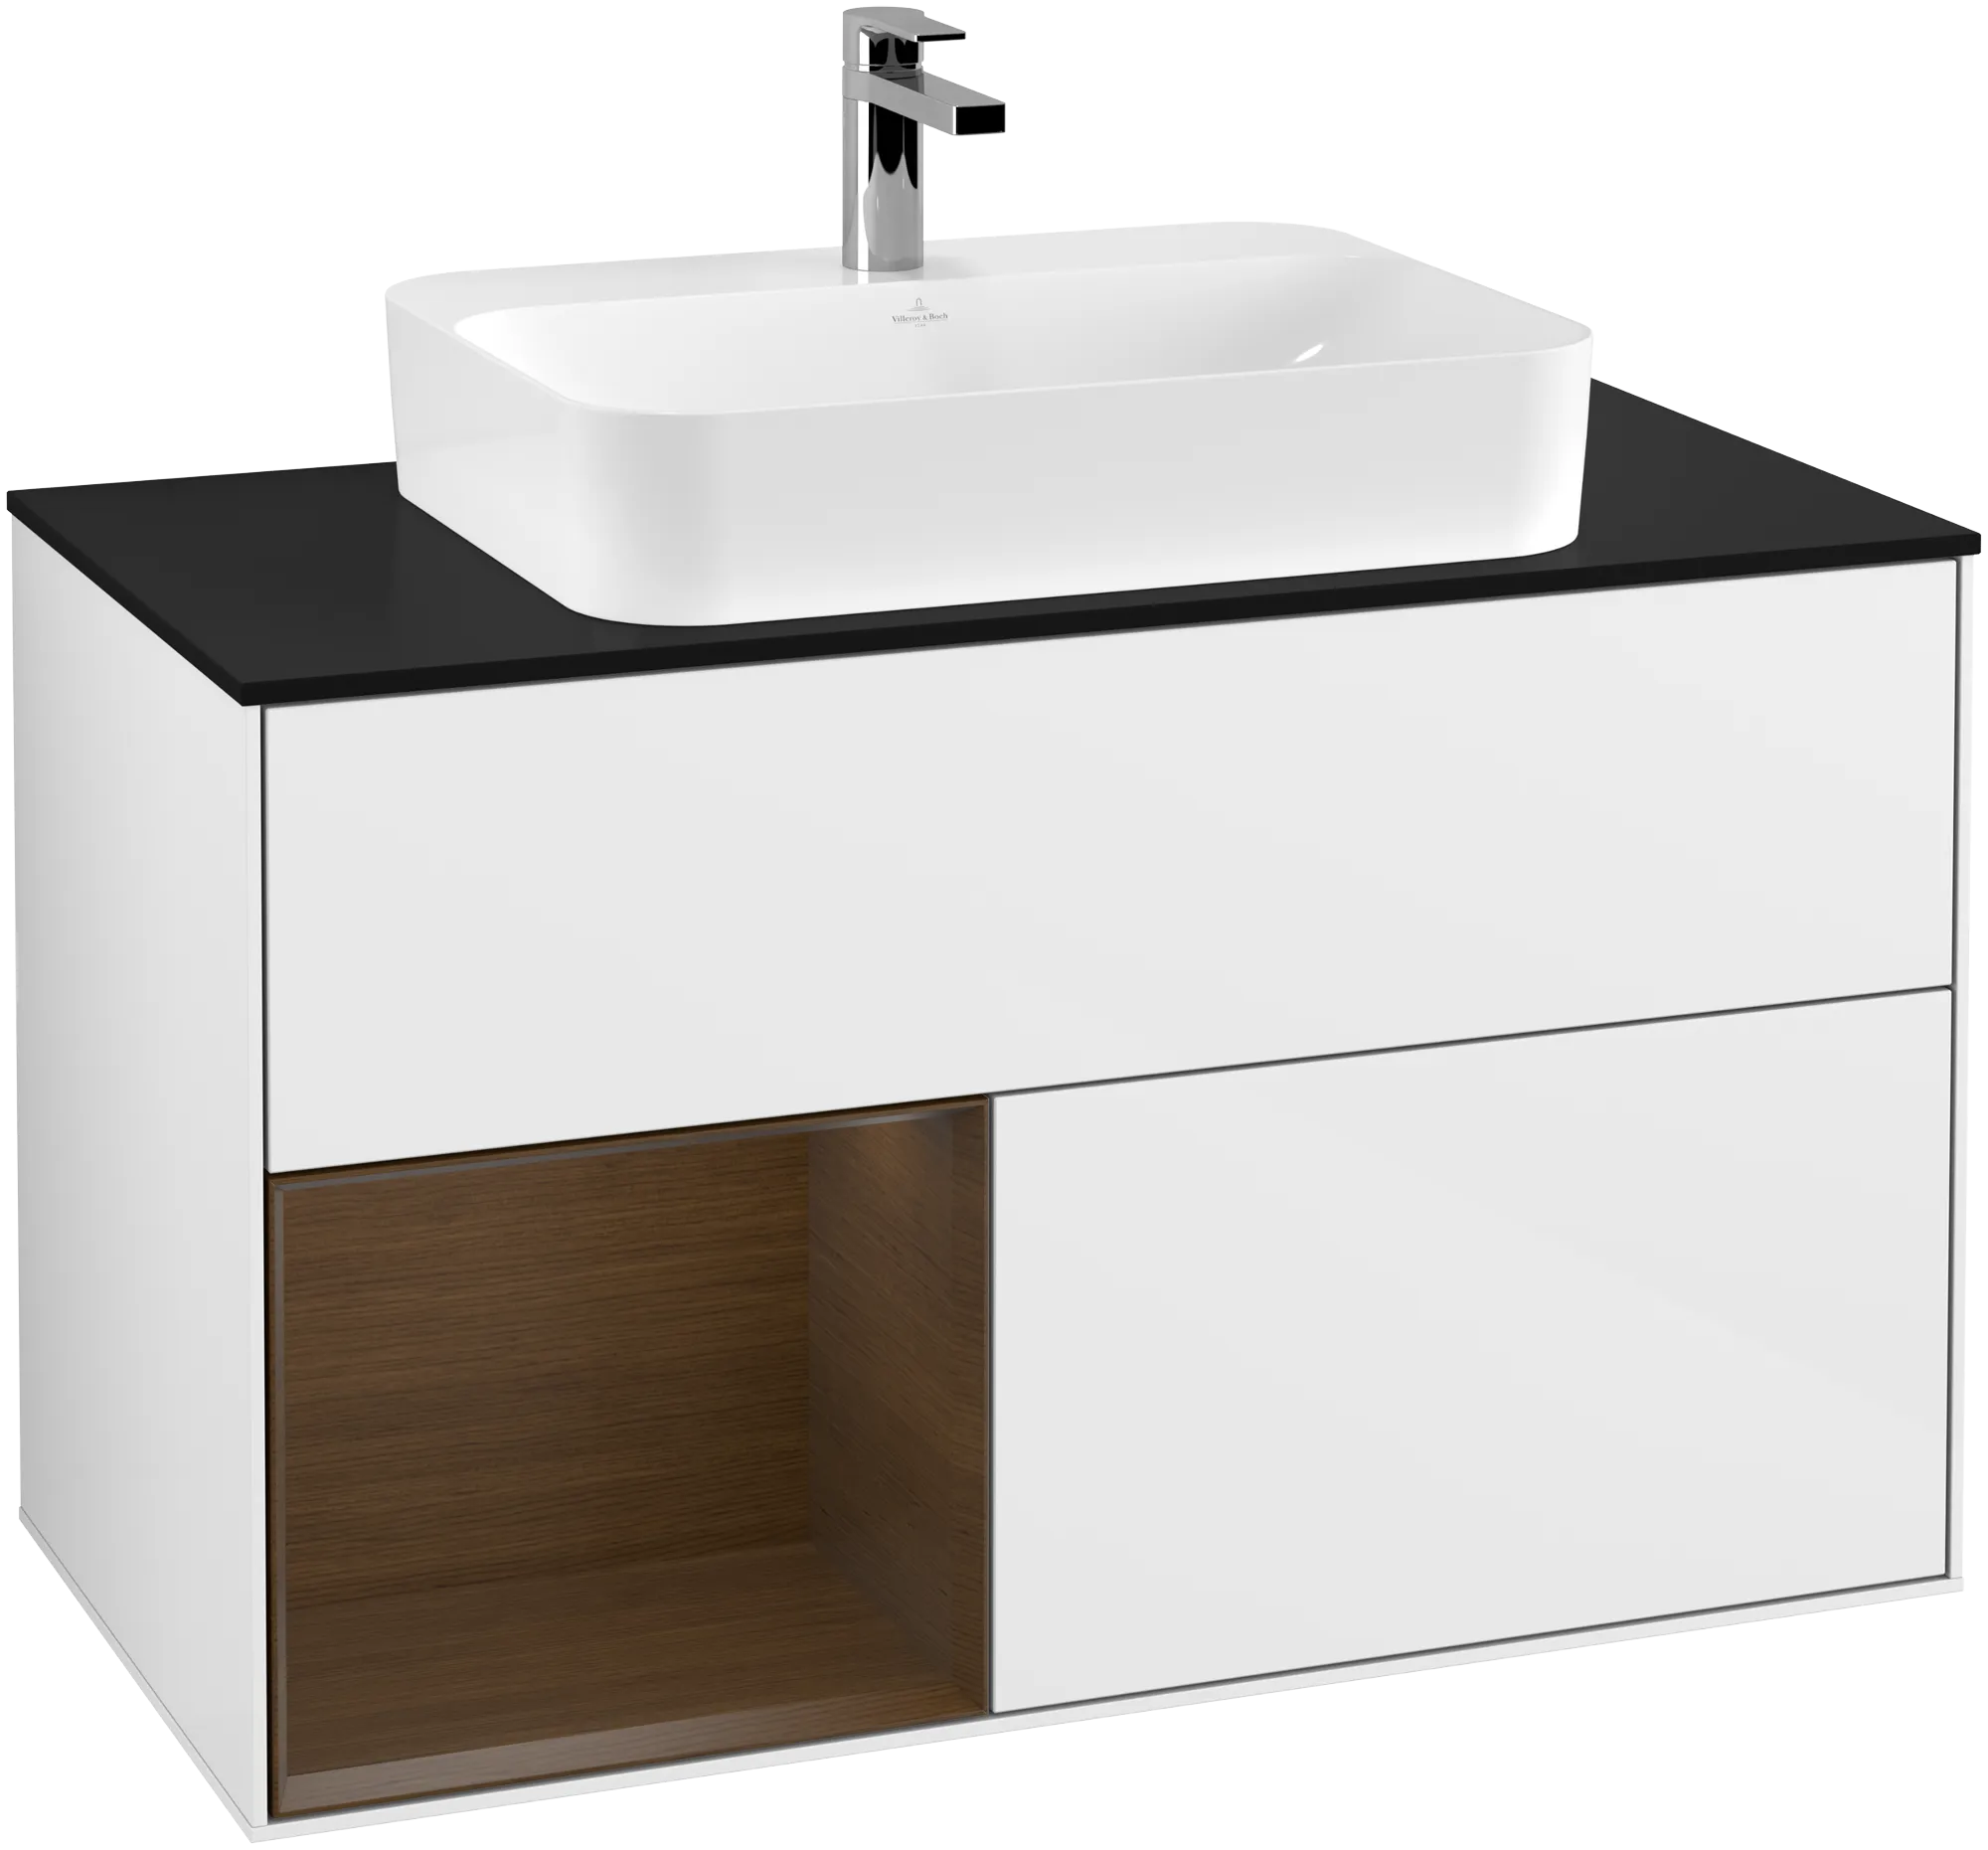 Picture of VILLEROY BOCH Finion Vanity unit, with lighting, 2 pull-out compartments, 1000 x 603 x 501 mm, Glossy White Lacquer / Walnut Veneer / Glass Black Matt #G362GNGF